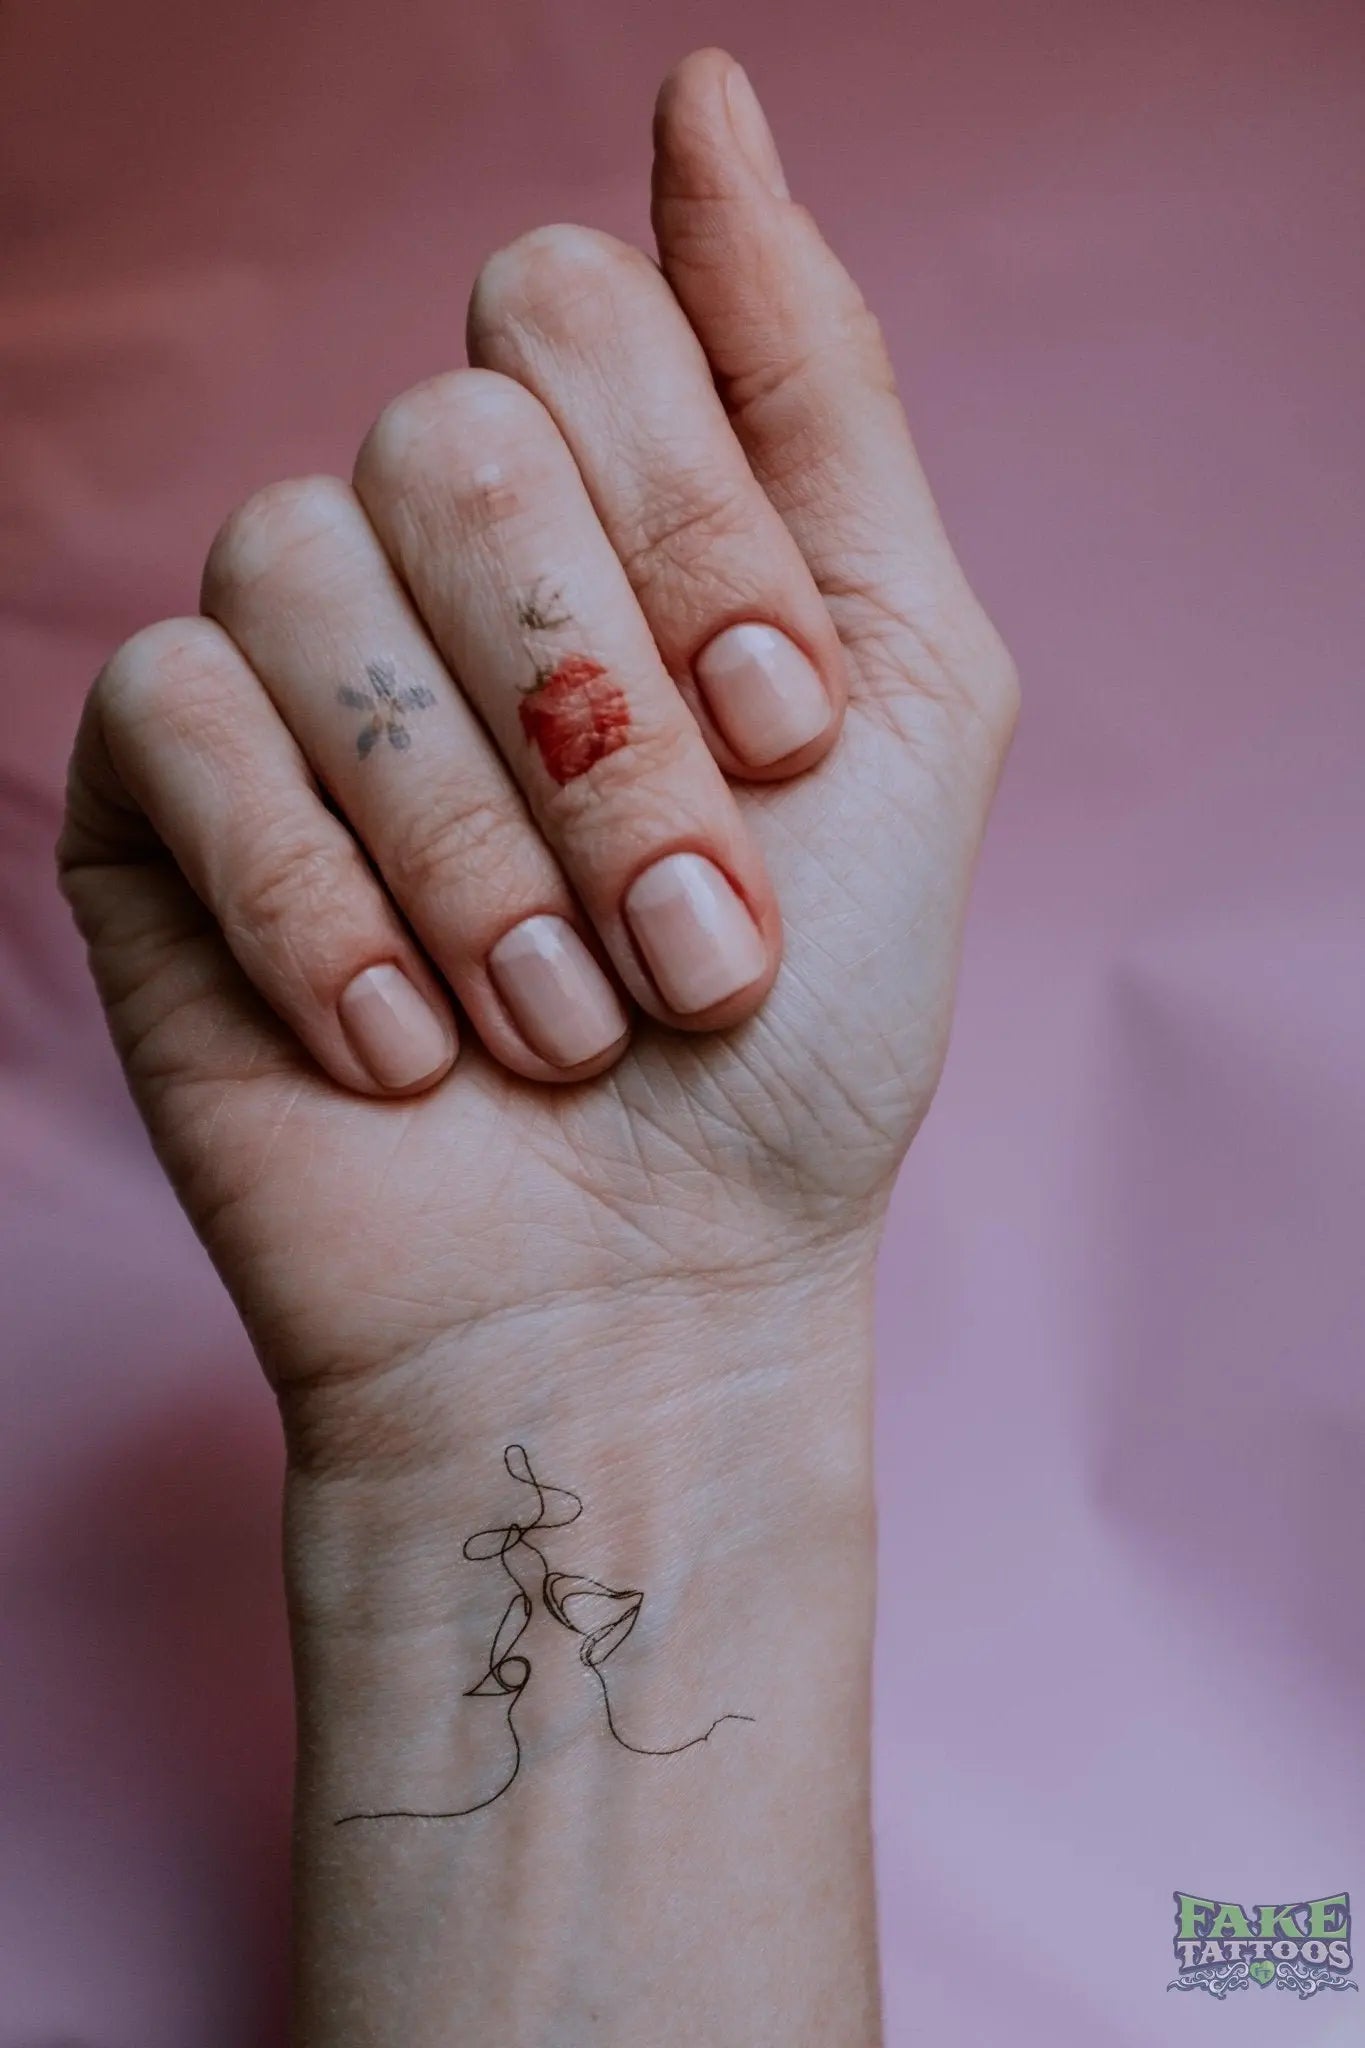 Many Mental Health Benefits of Getting Tattoos in Toronto